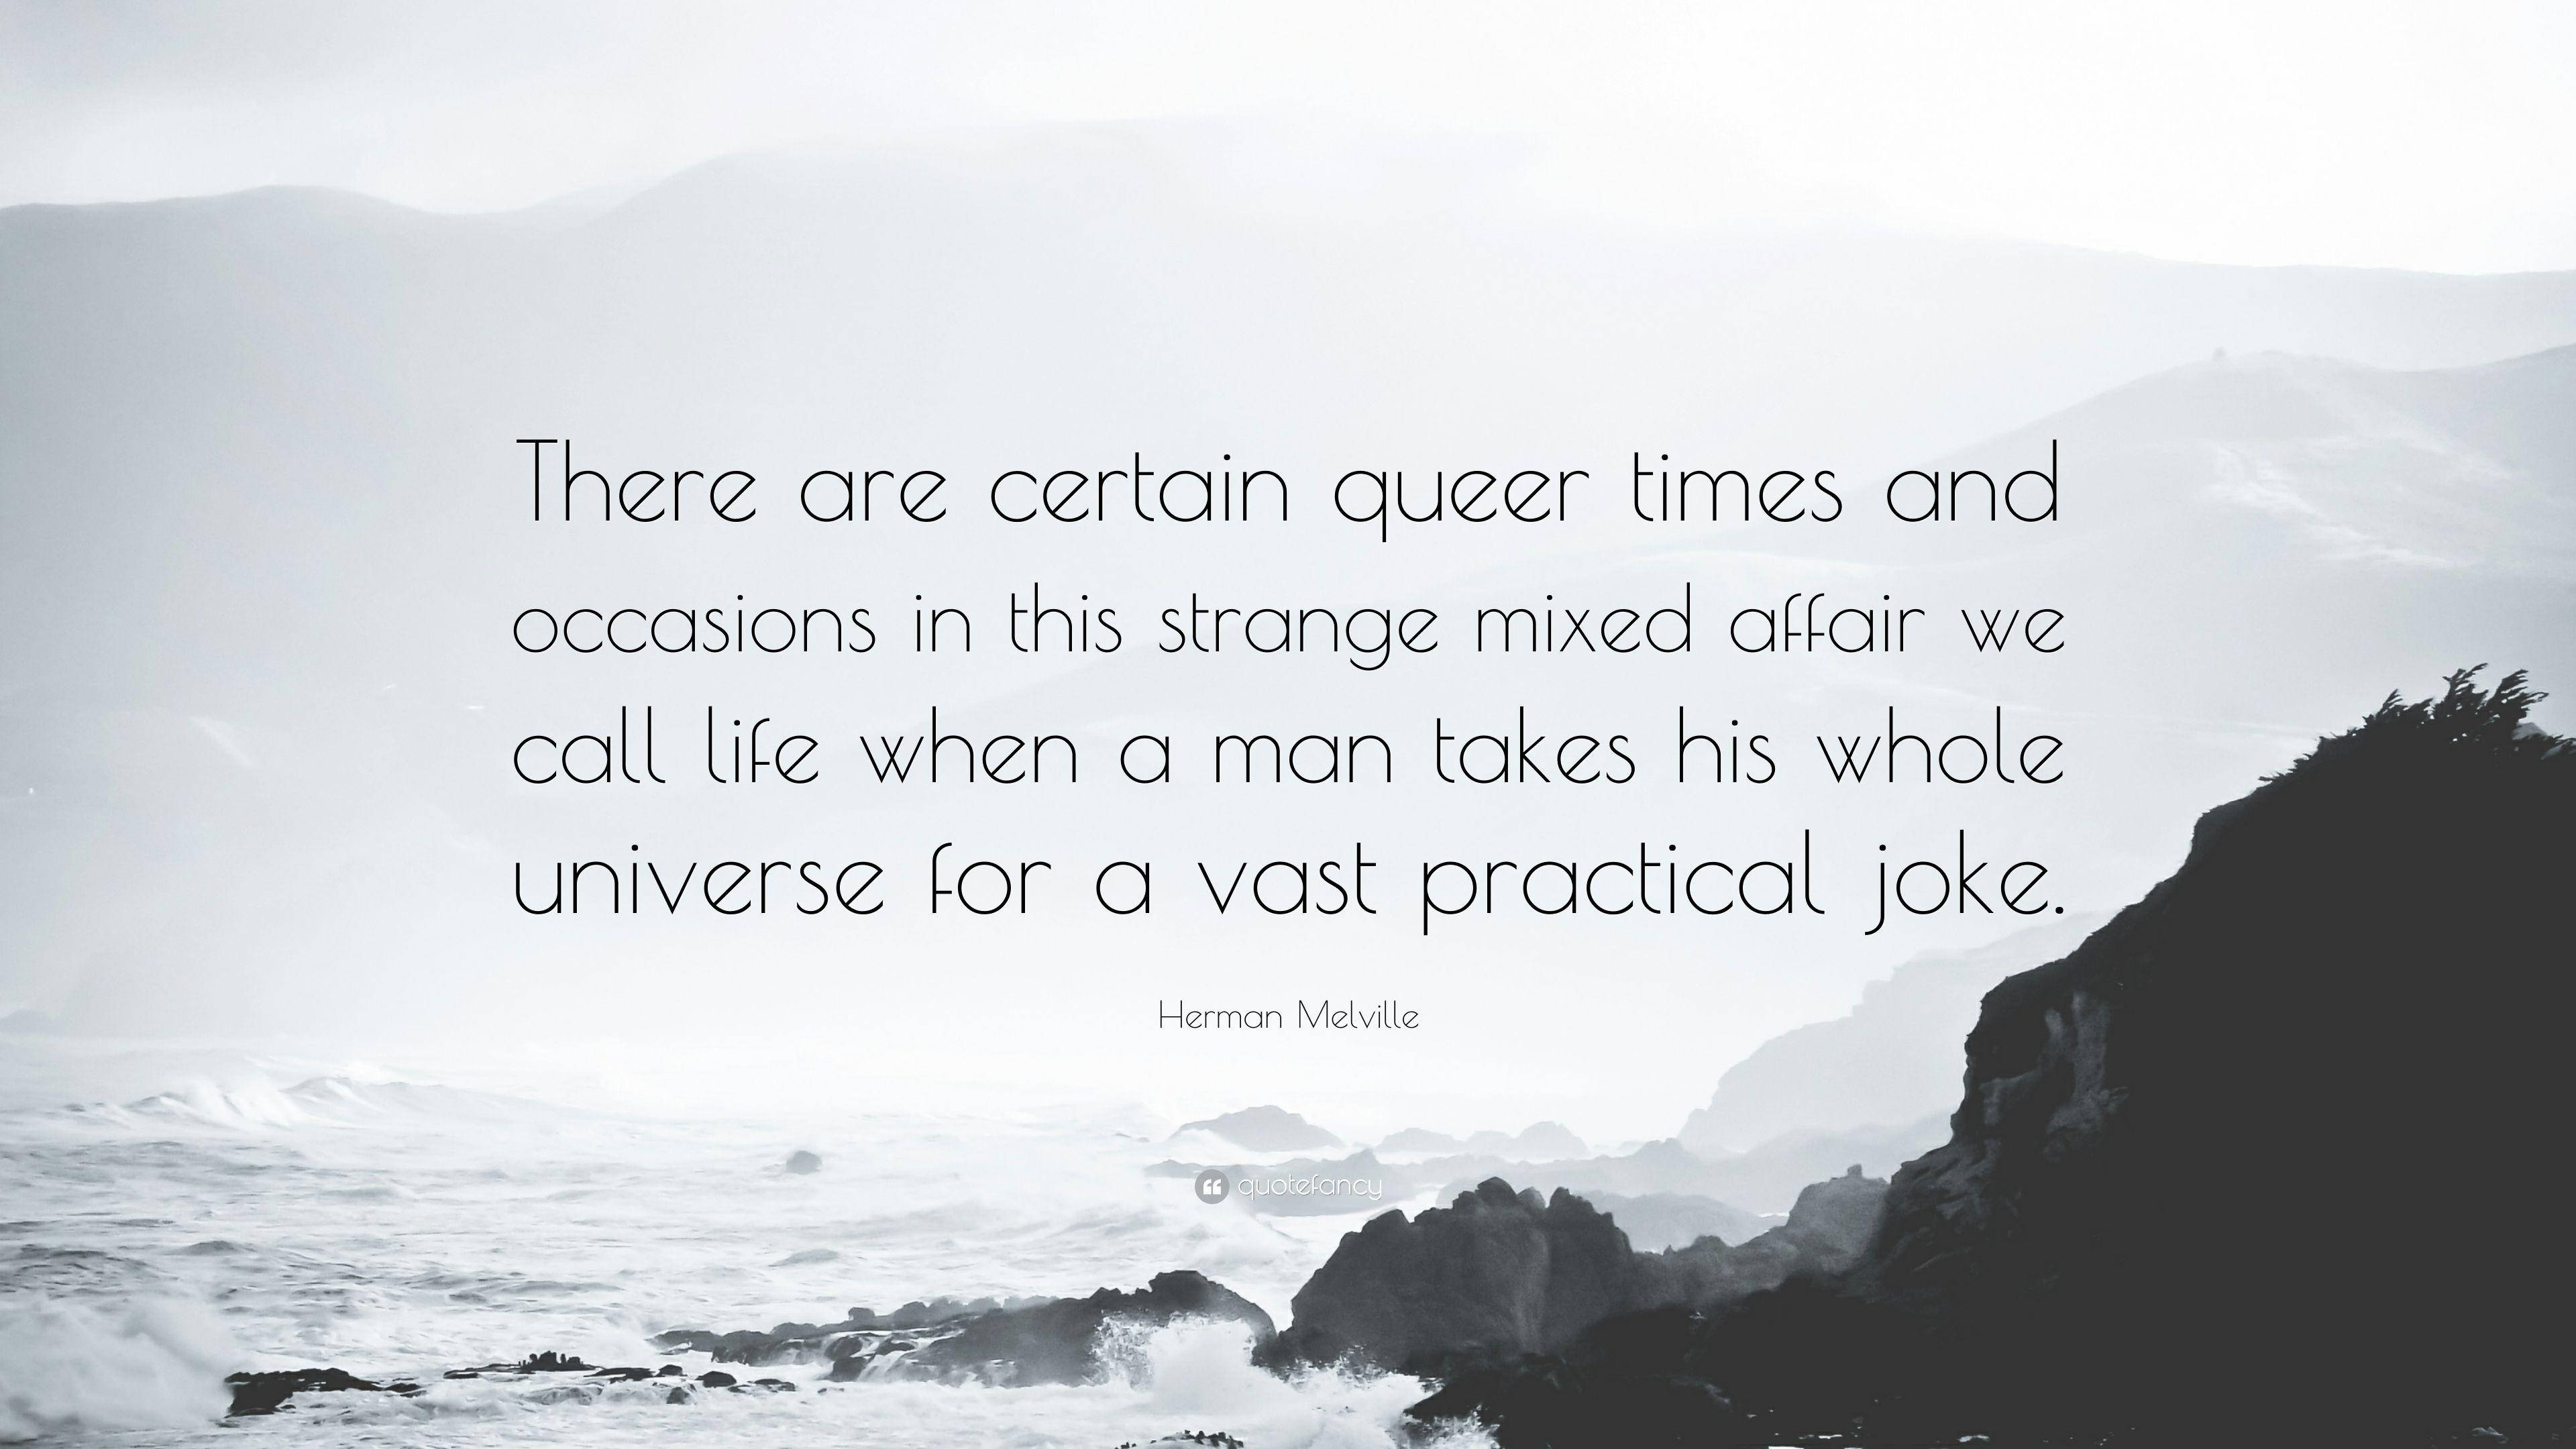 Beautiful Graphic Queer Quotes Wallpaper